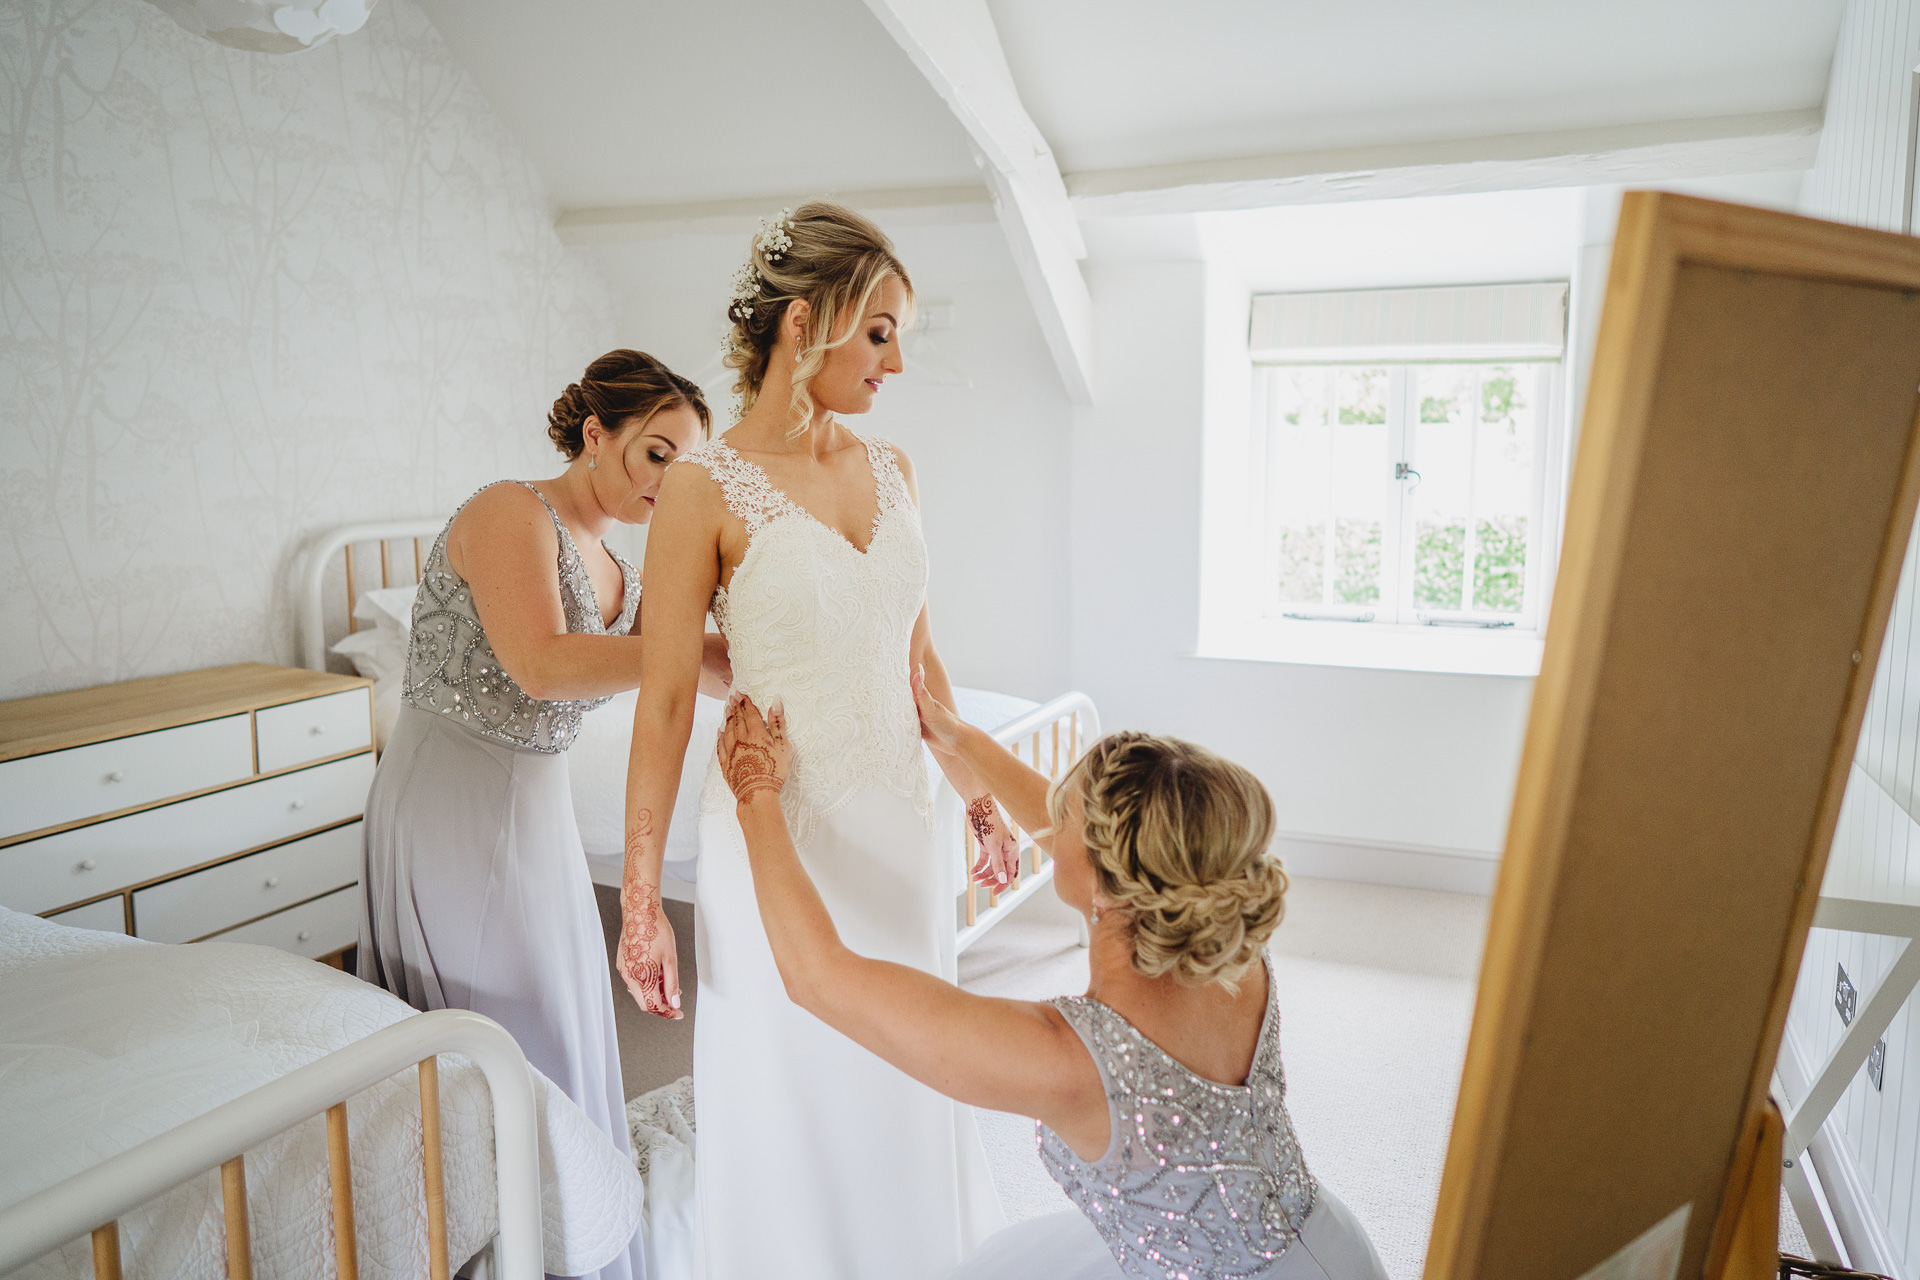 Bride putting on her wedding dress with bridesmaids